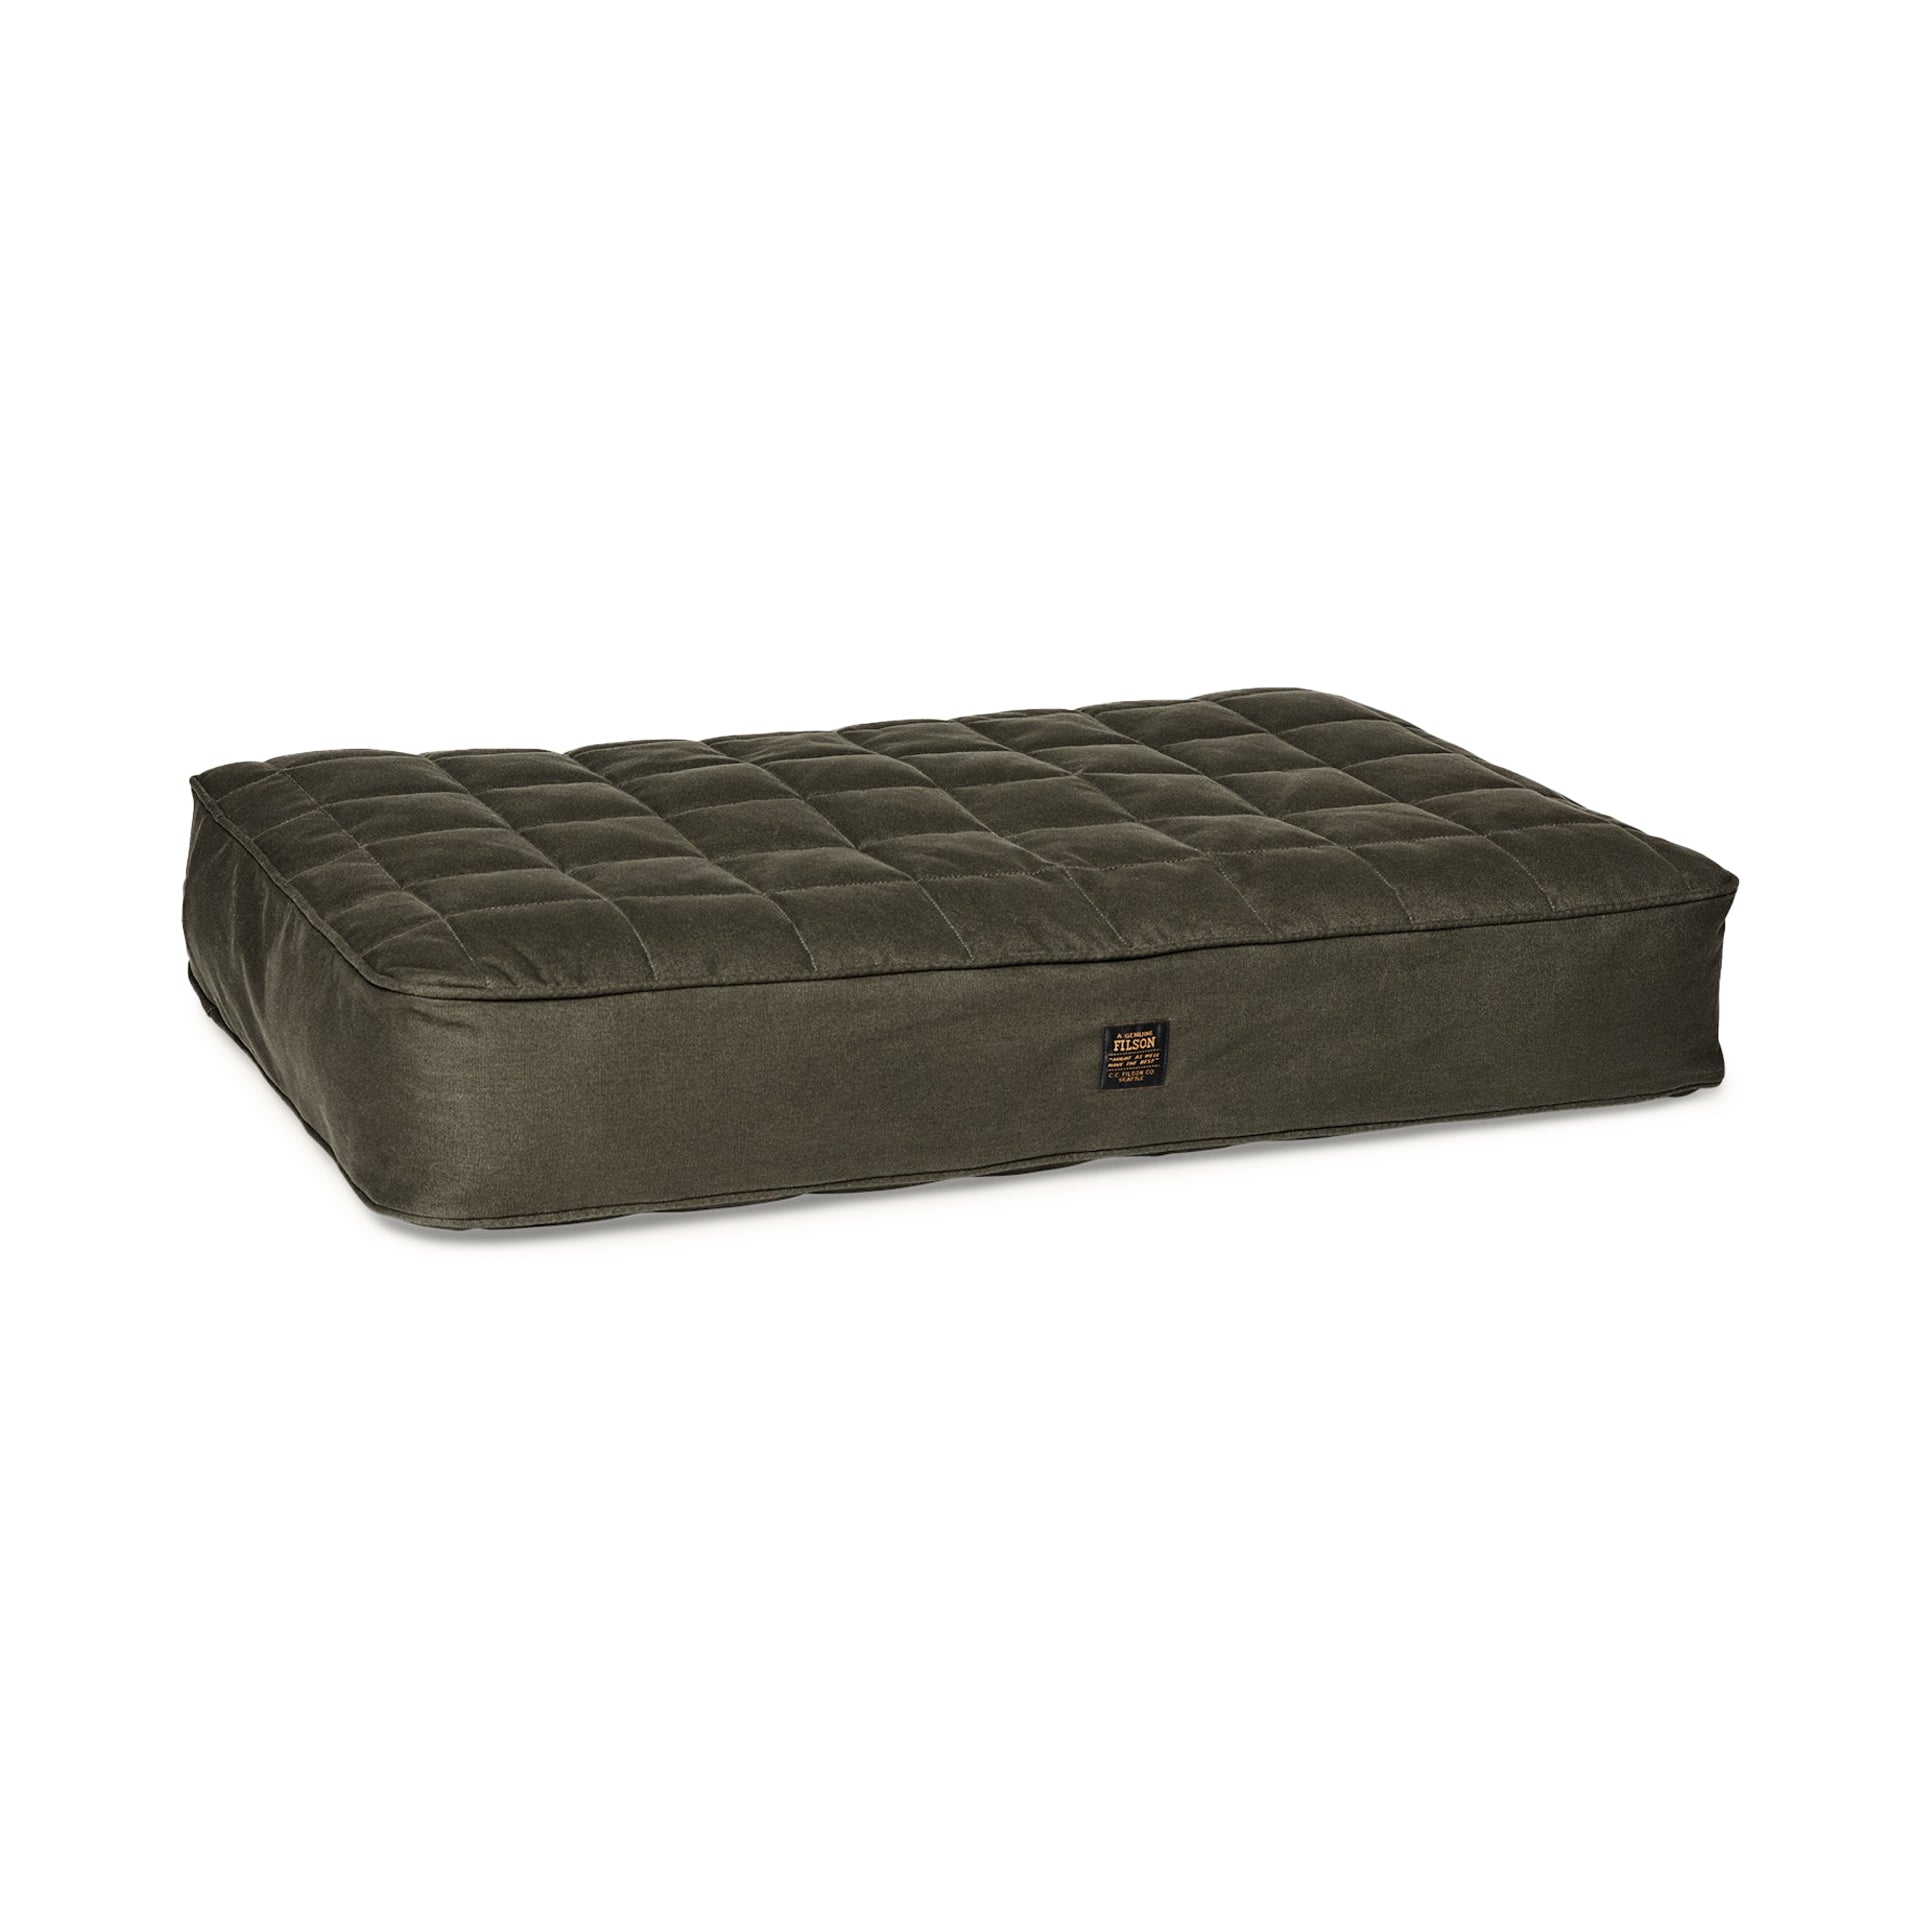 Filson Dog Bed | Uncrate Supply, #Filson #Dog #Bed #Uncrate #Supply